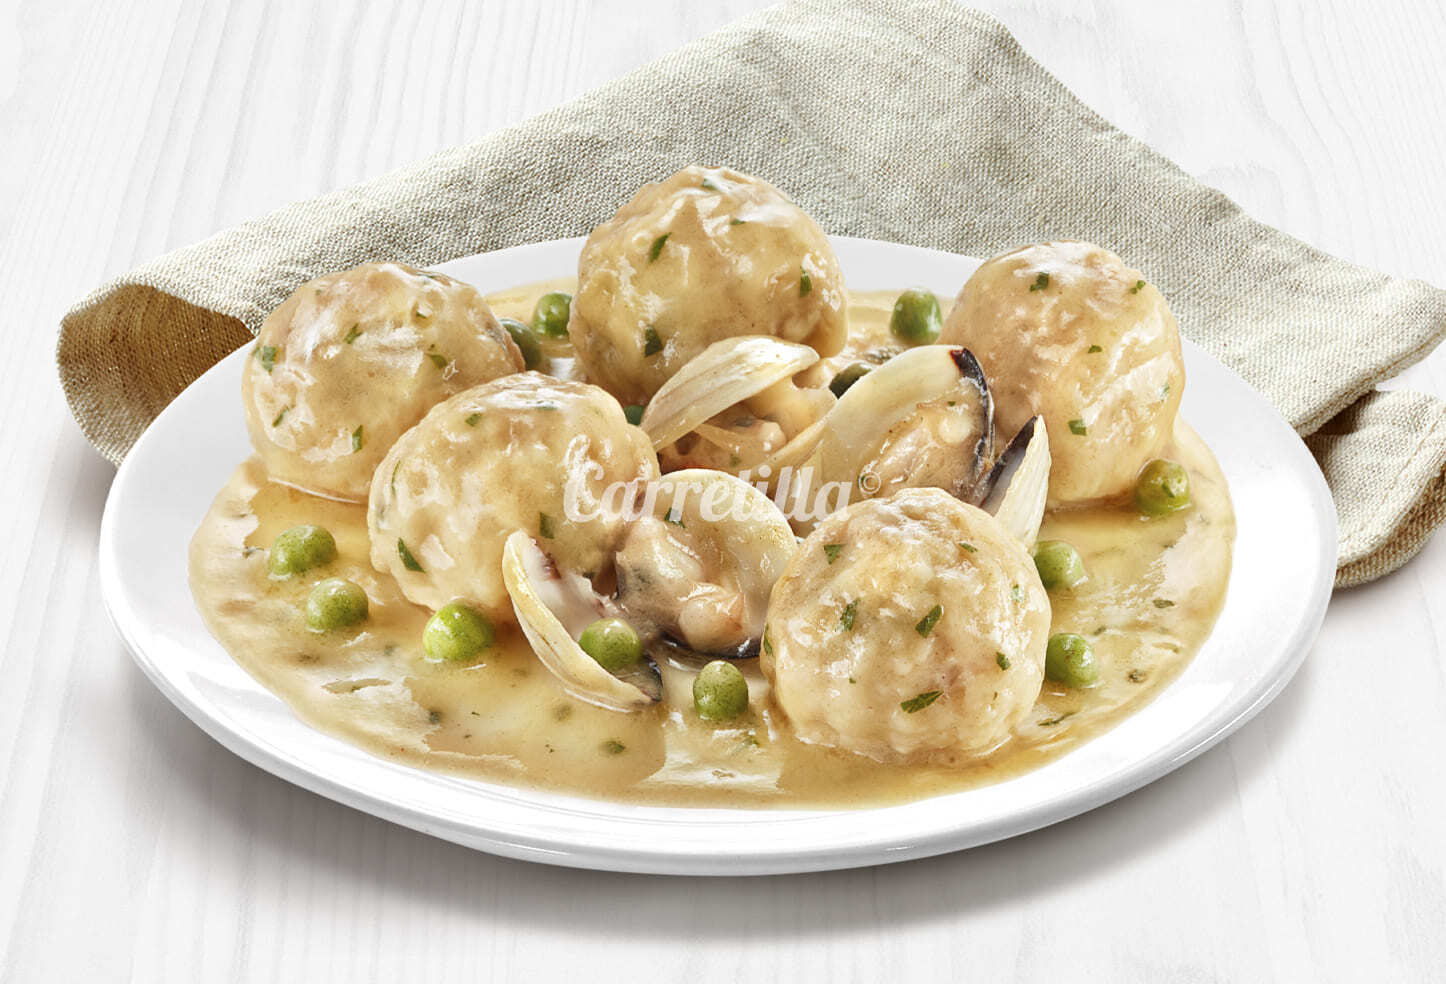 Hake Meatballs with Clams